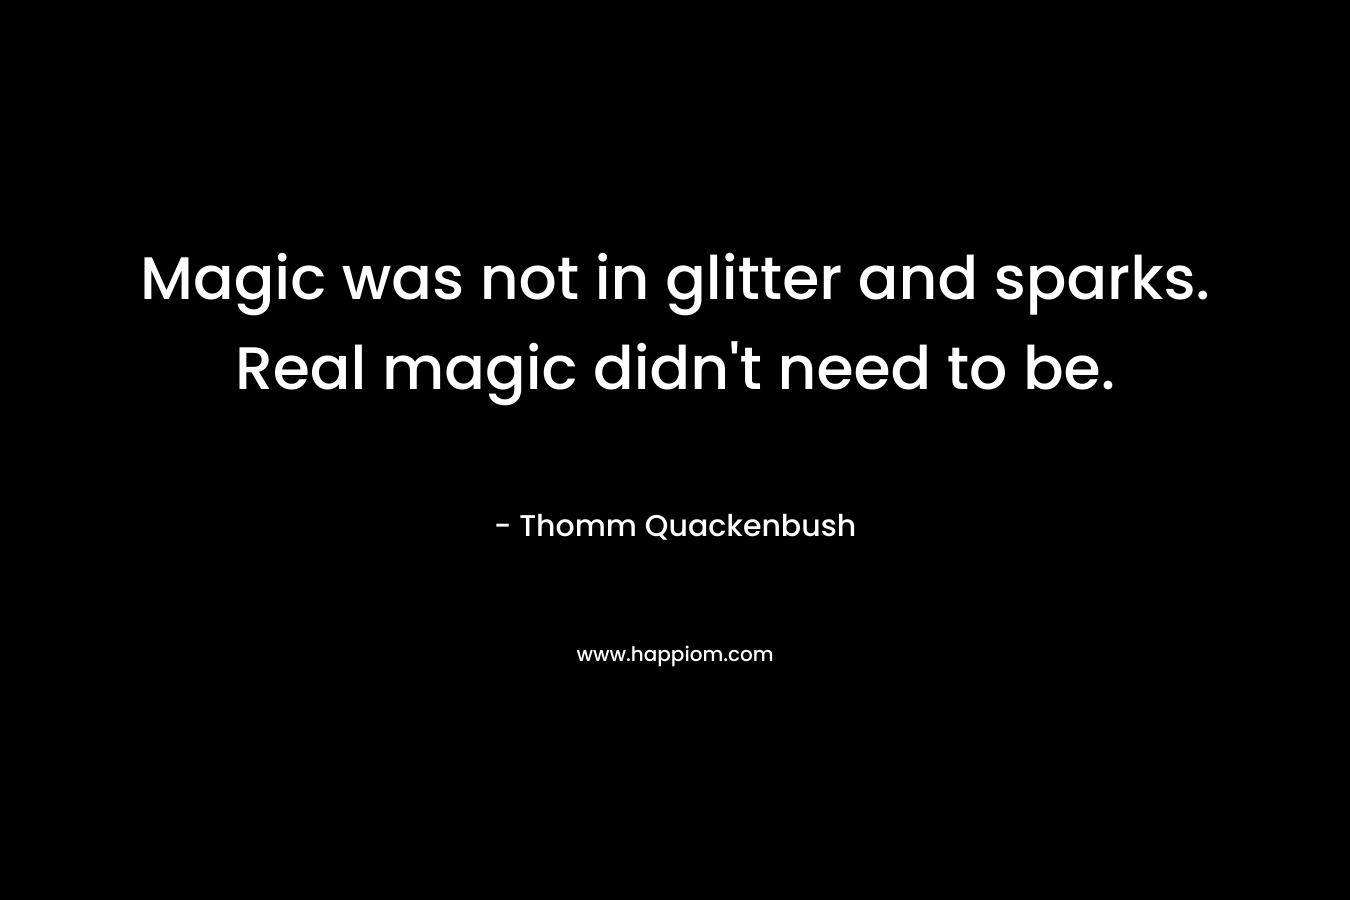 Magic was not in glitter and sparks. Real magic didn’t need to be. – Thomm Quackenbush